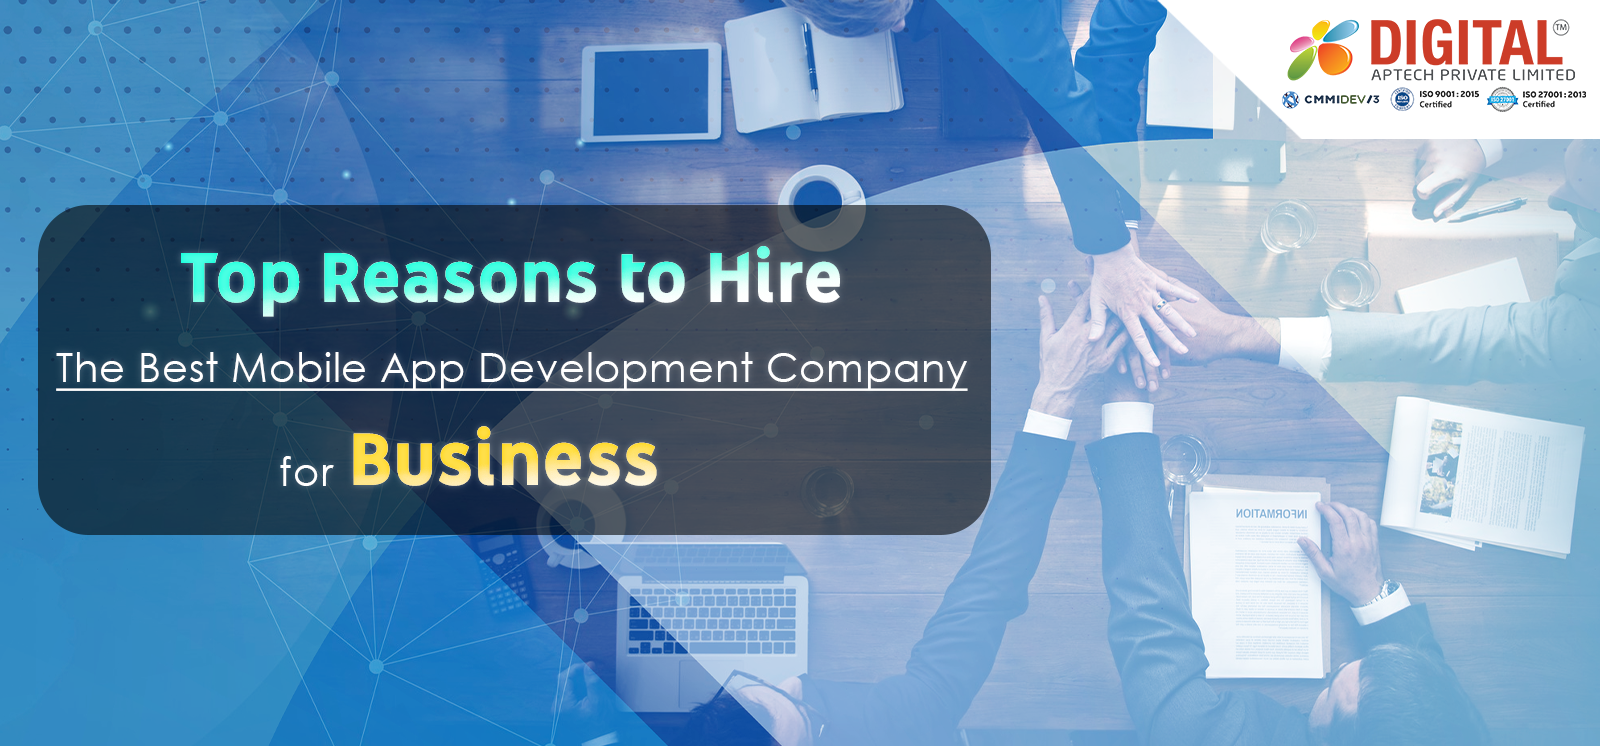 Top Reasons to Hire the Best Mobile App Development Company for Businesses